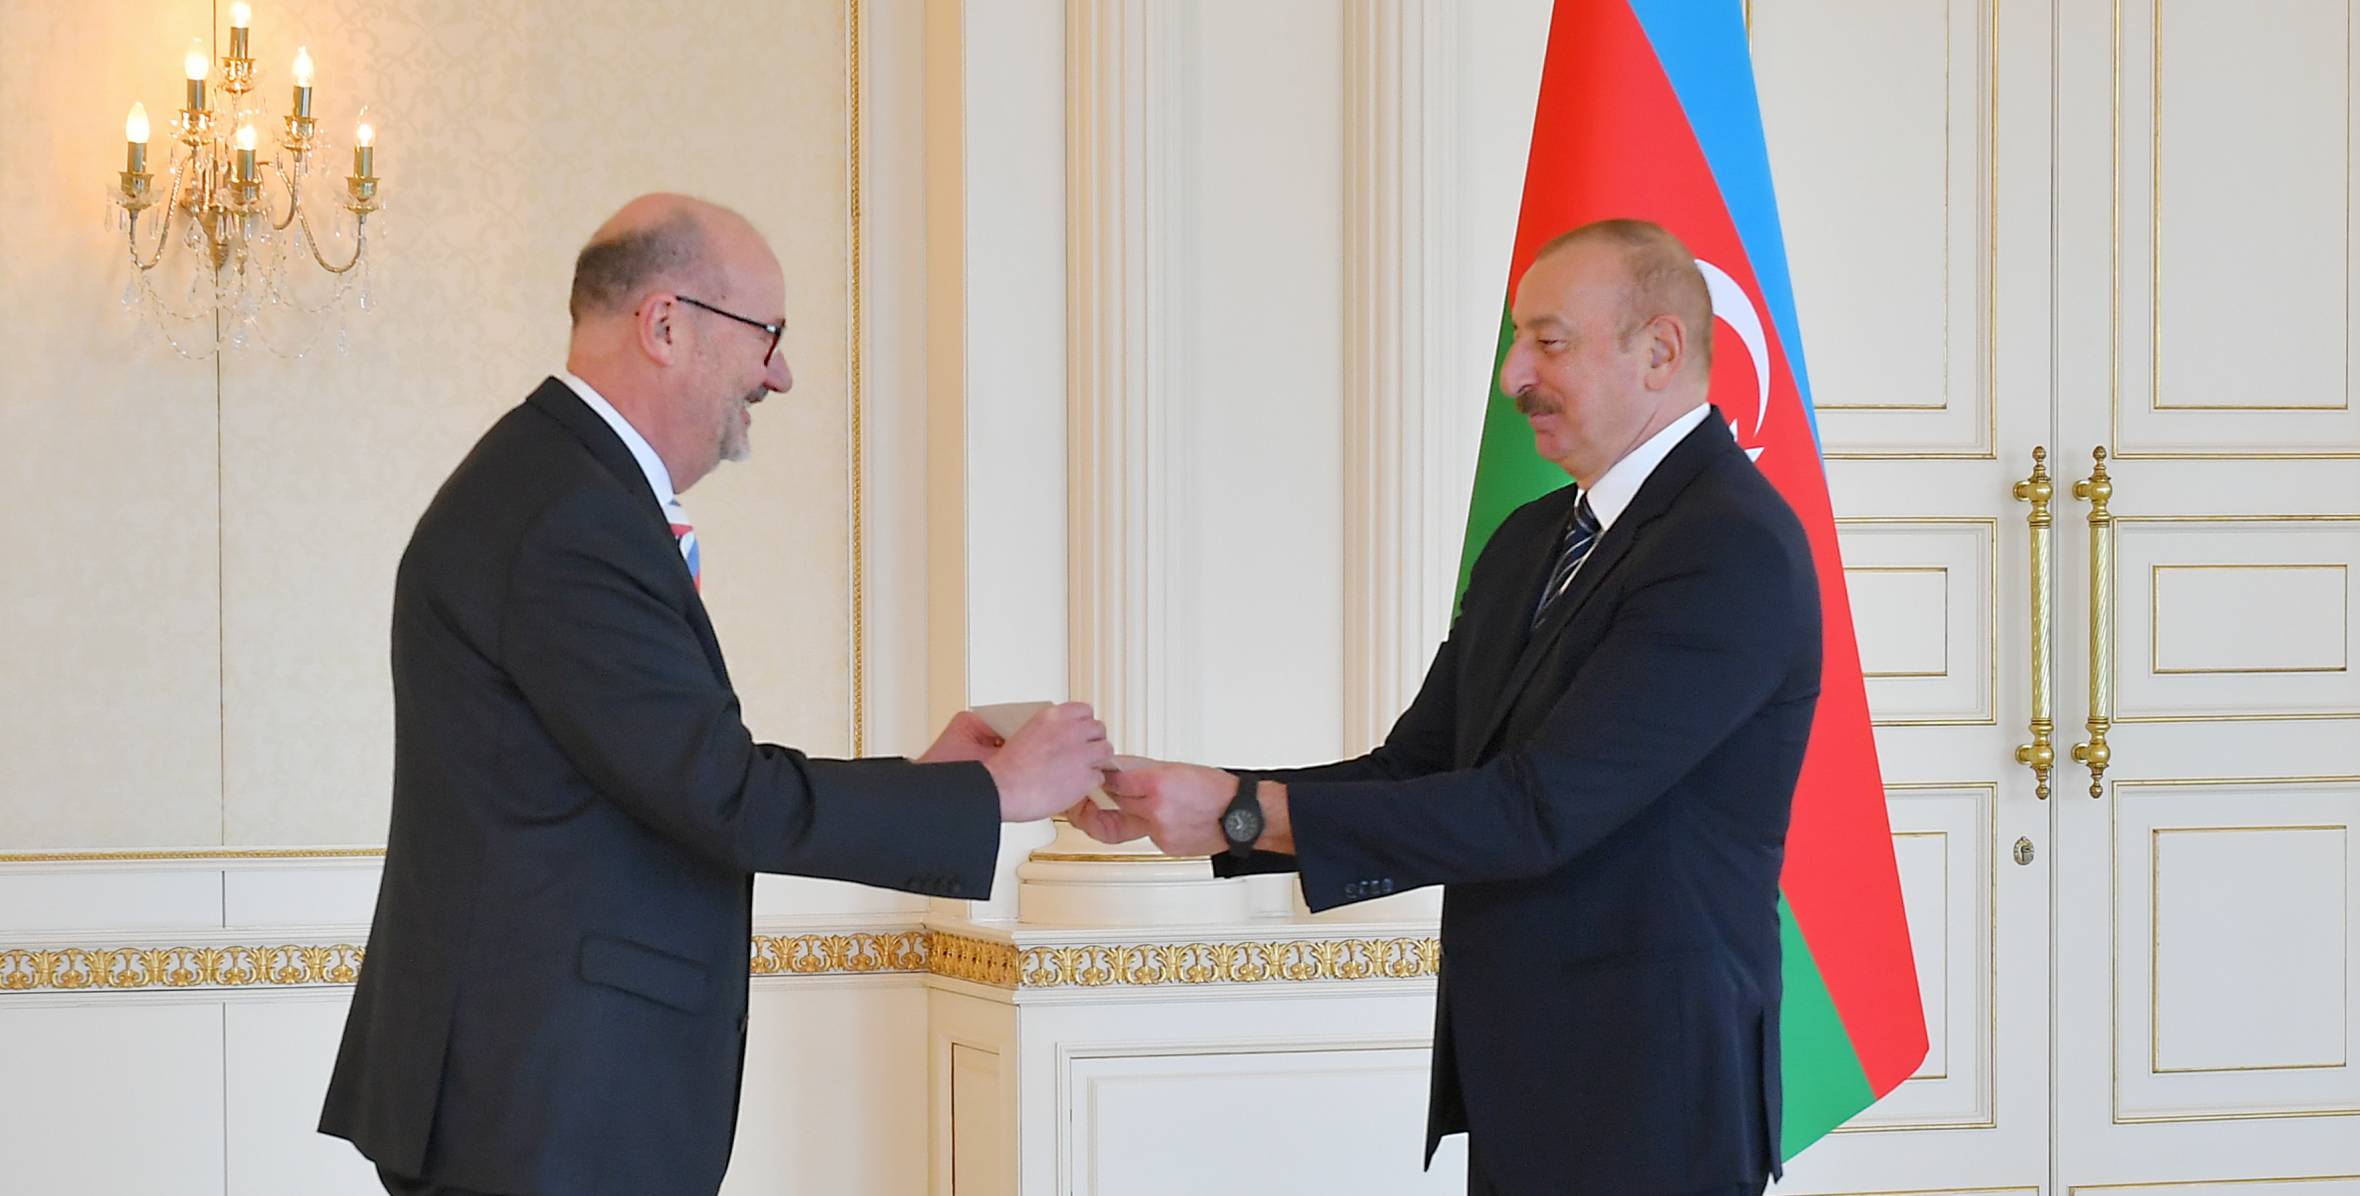 Ilham Aliyev accepted credentials of incoming ambassador of Luxembourg to Azerbaijan